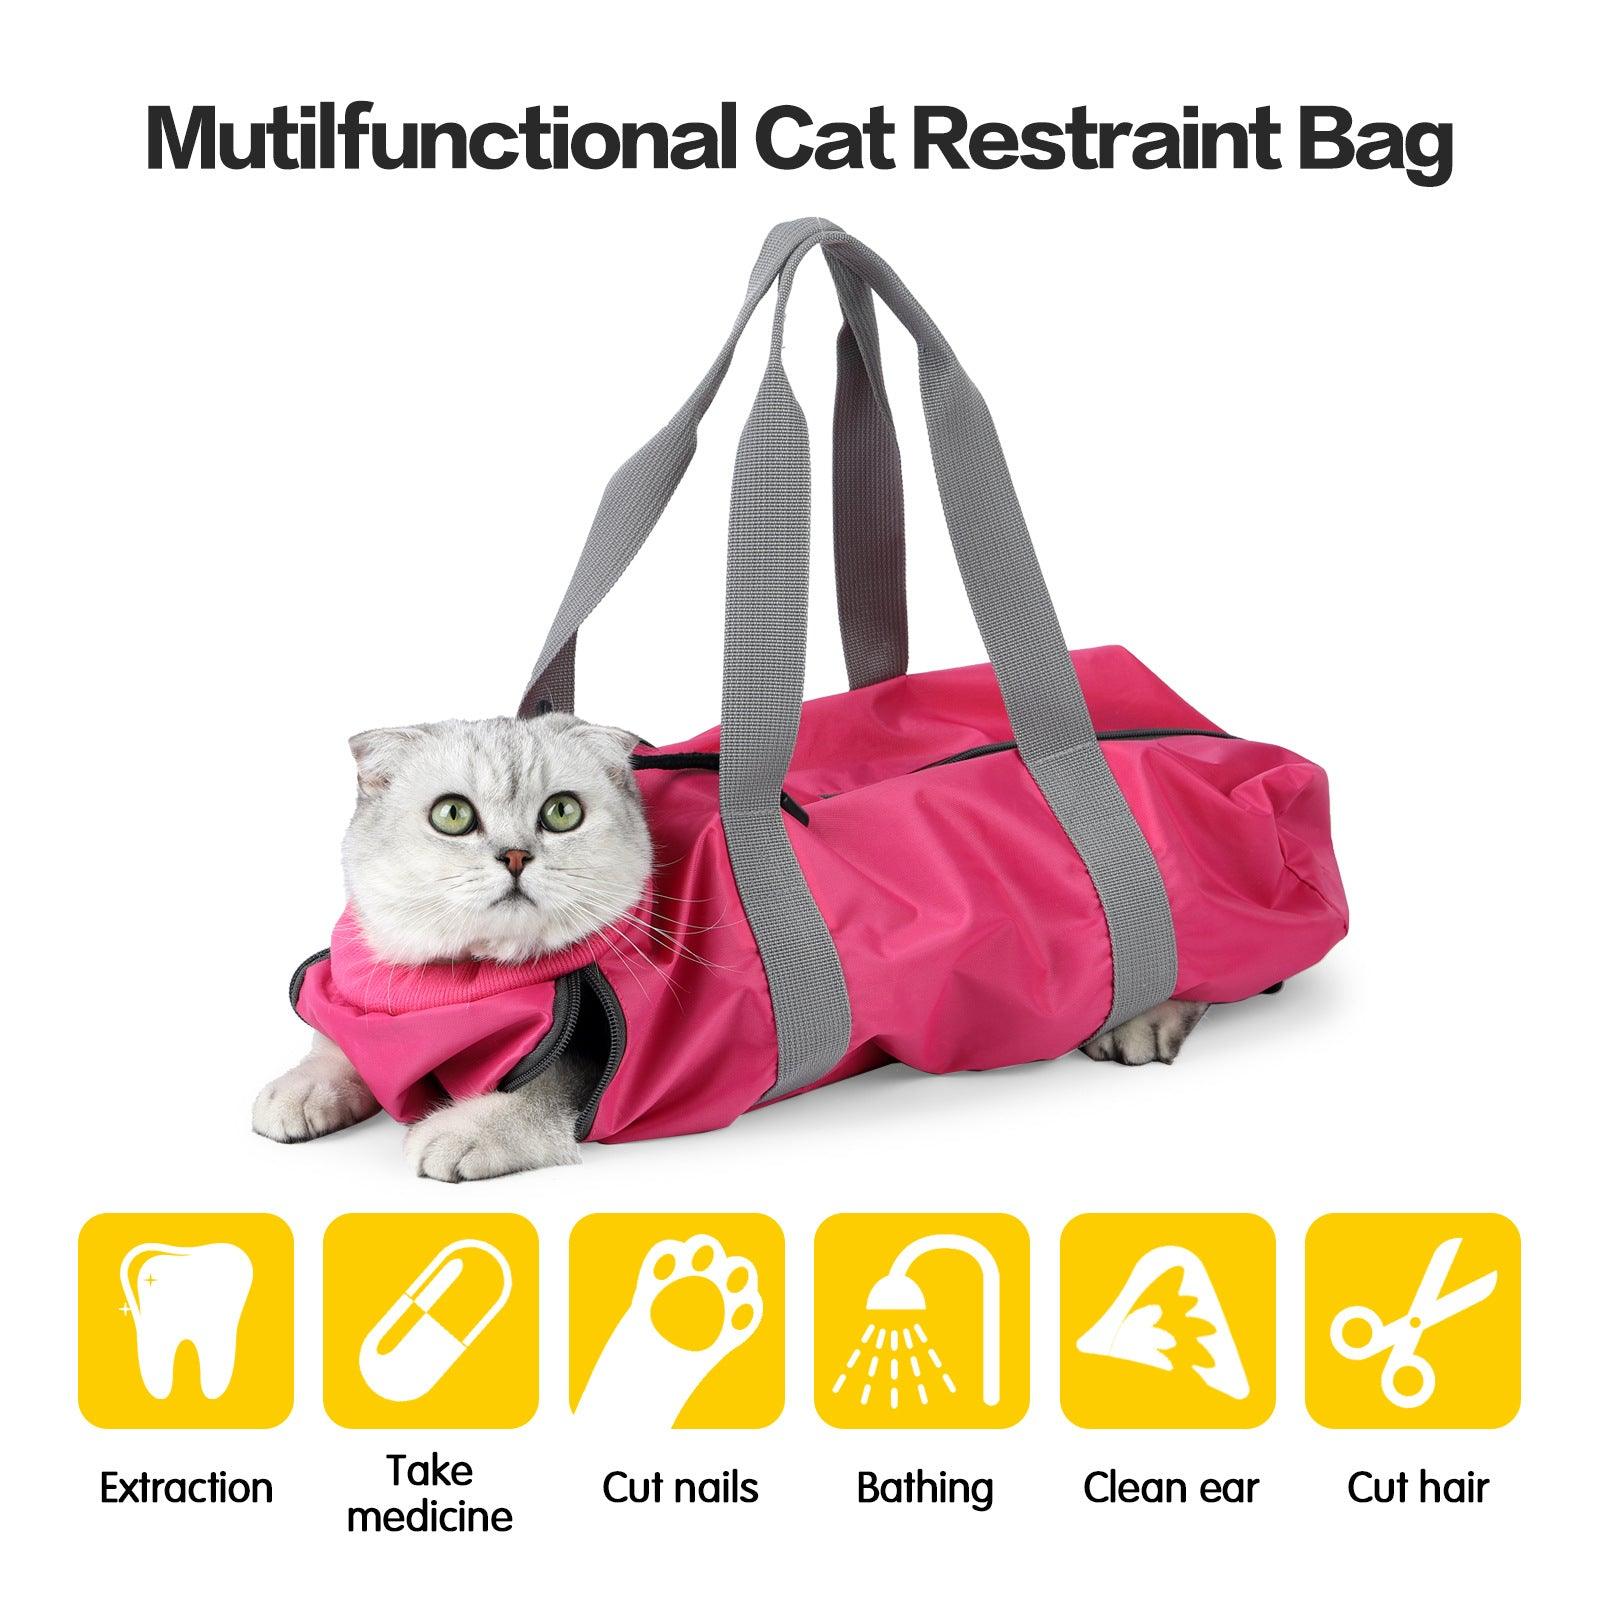 Anti-Scratch and Bite Cat Travel Bag with Double Lining - Stylish and Secure Pet Carrier - Dog Hugs Cat